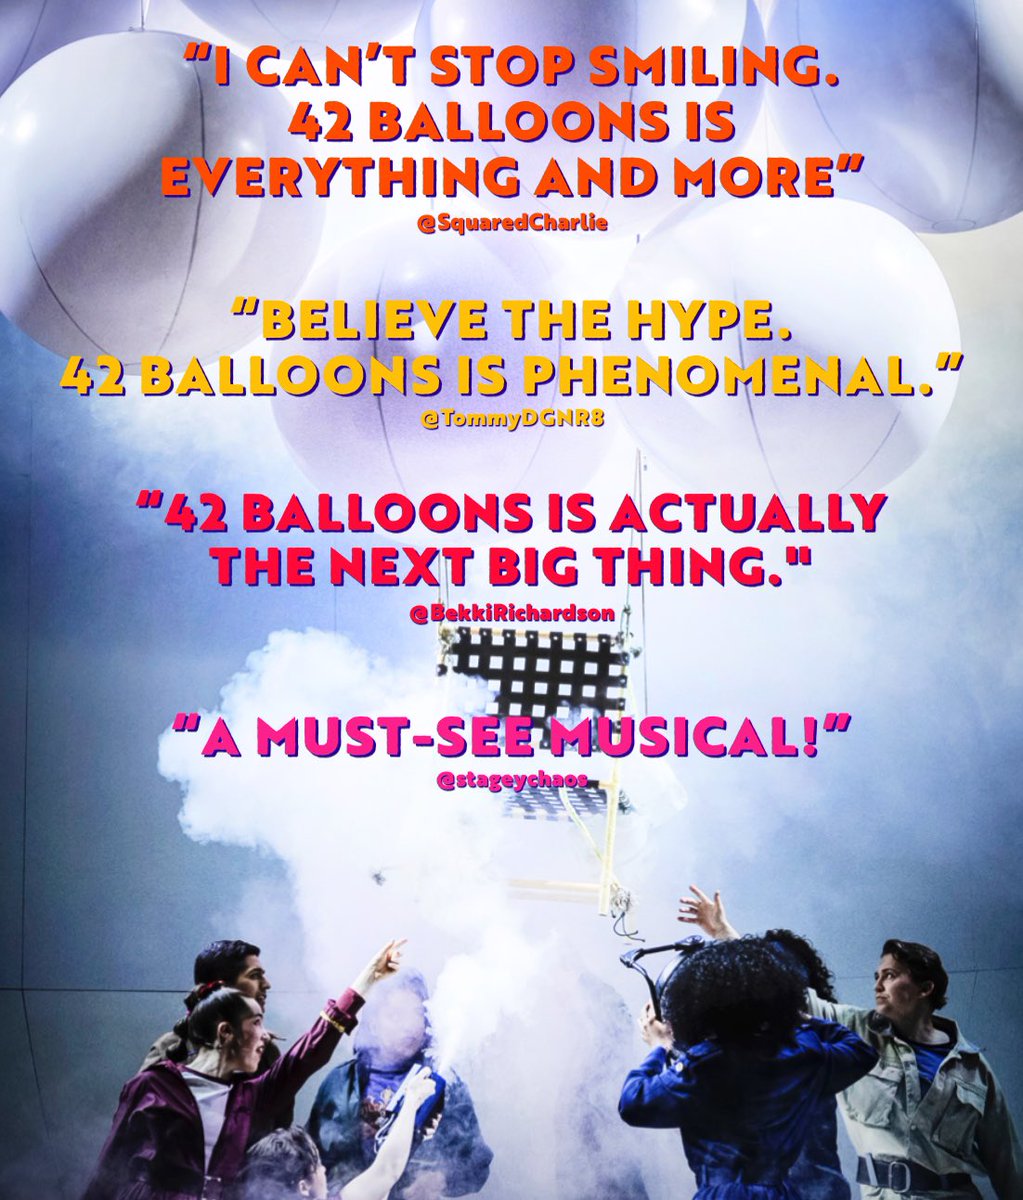 Don’t just take their word for it. Come and see the world premiere of 42 Balloons! 🎈✨ #42balloons #newmusical 

@The_Lowry